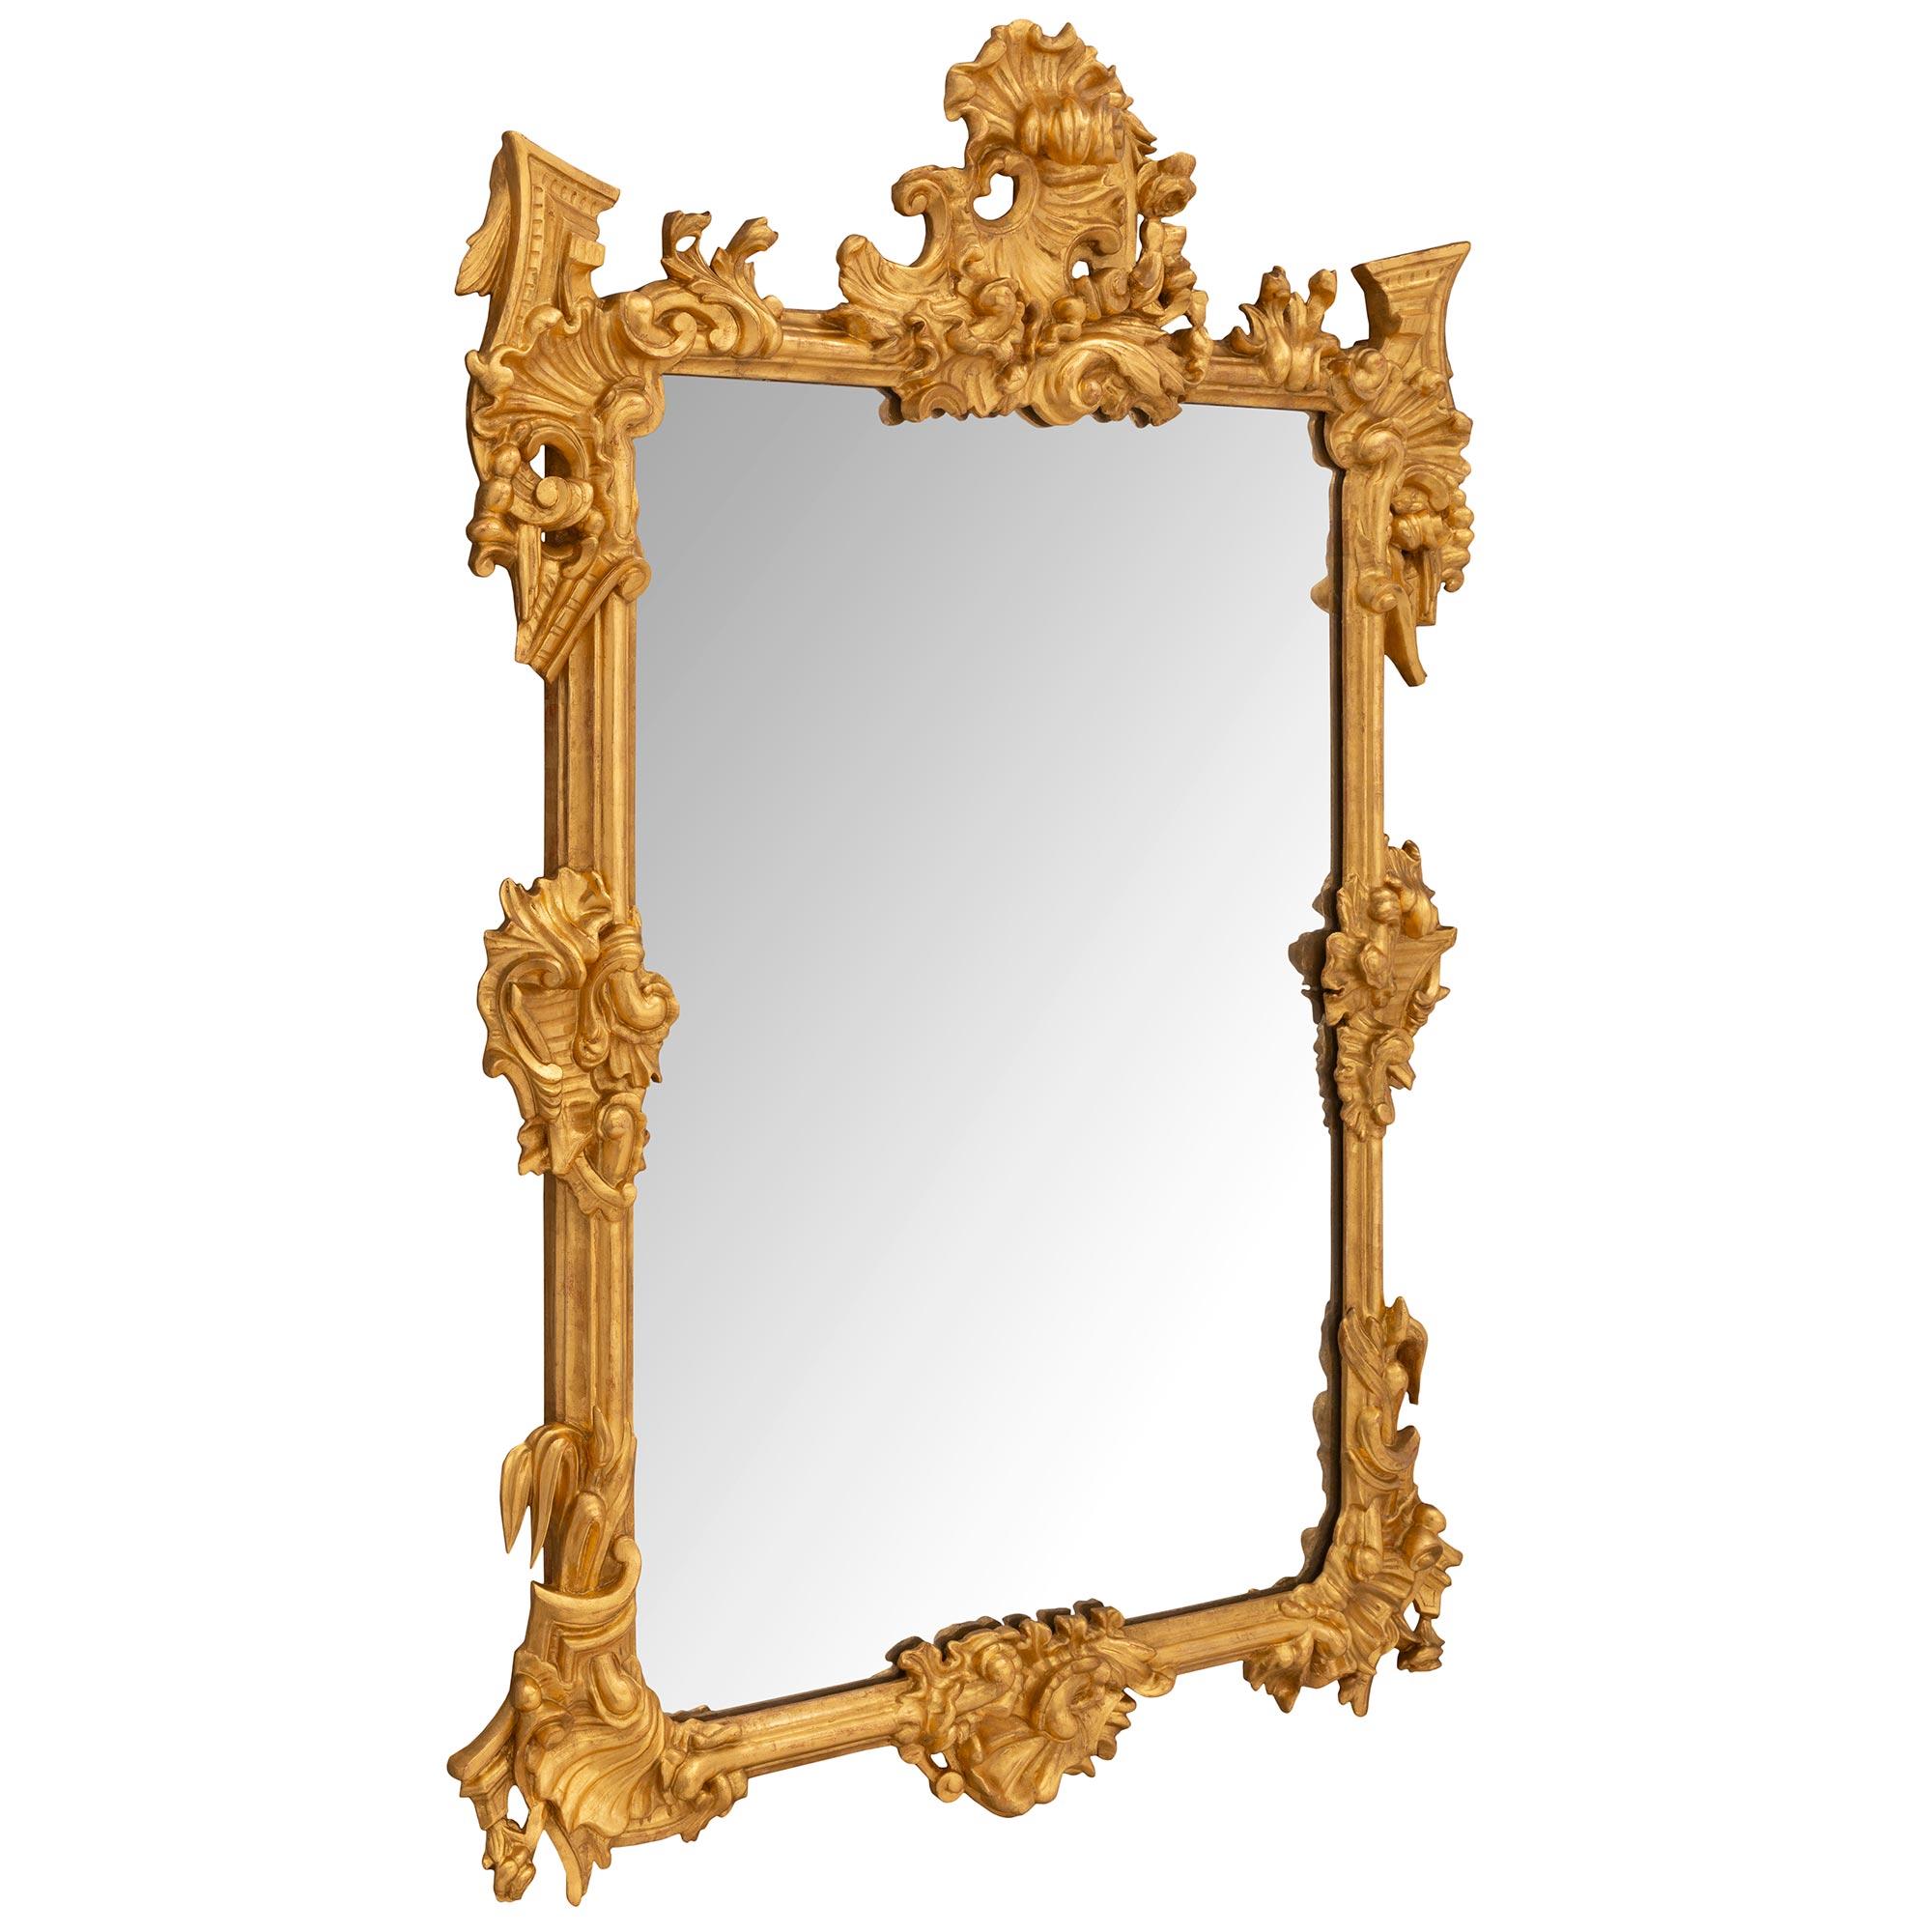 A stunning Italian 19th century Baroque st. giltwood mirror. The original mirror plate is set within an elegant mottled border which extends throughout the frame. At each corner are striking richly carved pierced foliate reserves with additional